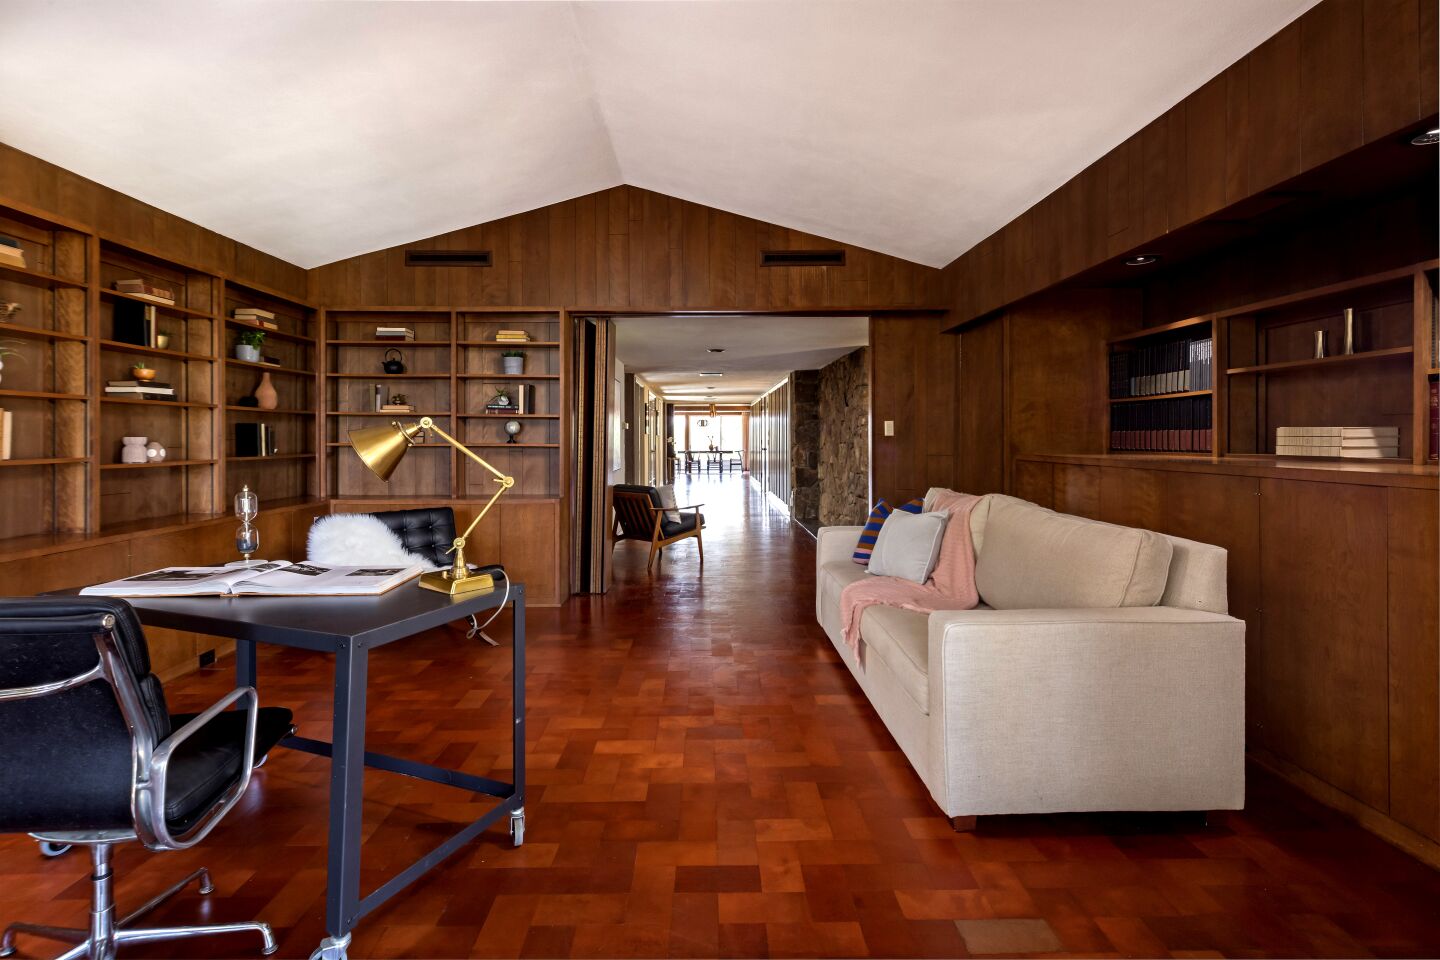 Leather floors. Wood built-ins. It's easy to feel groovy here.